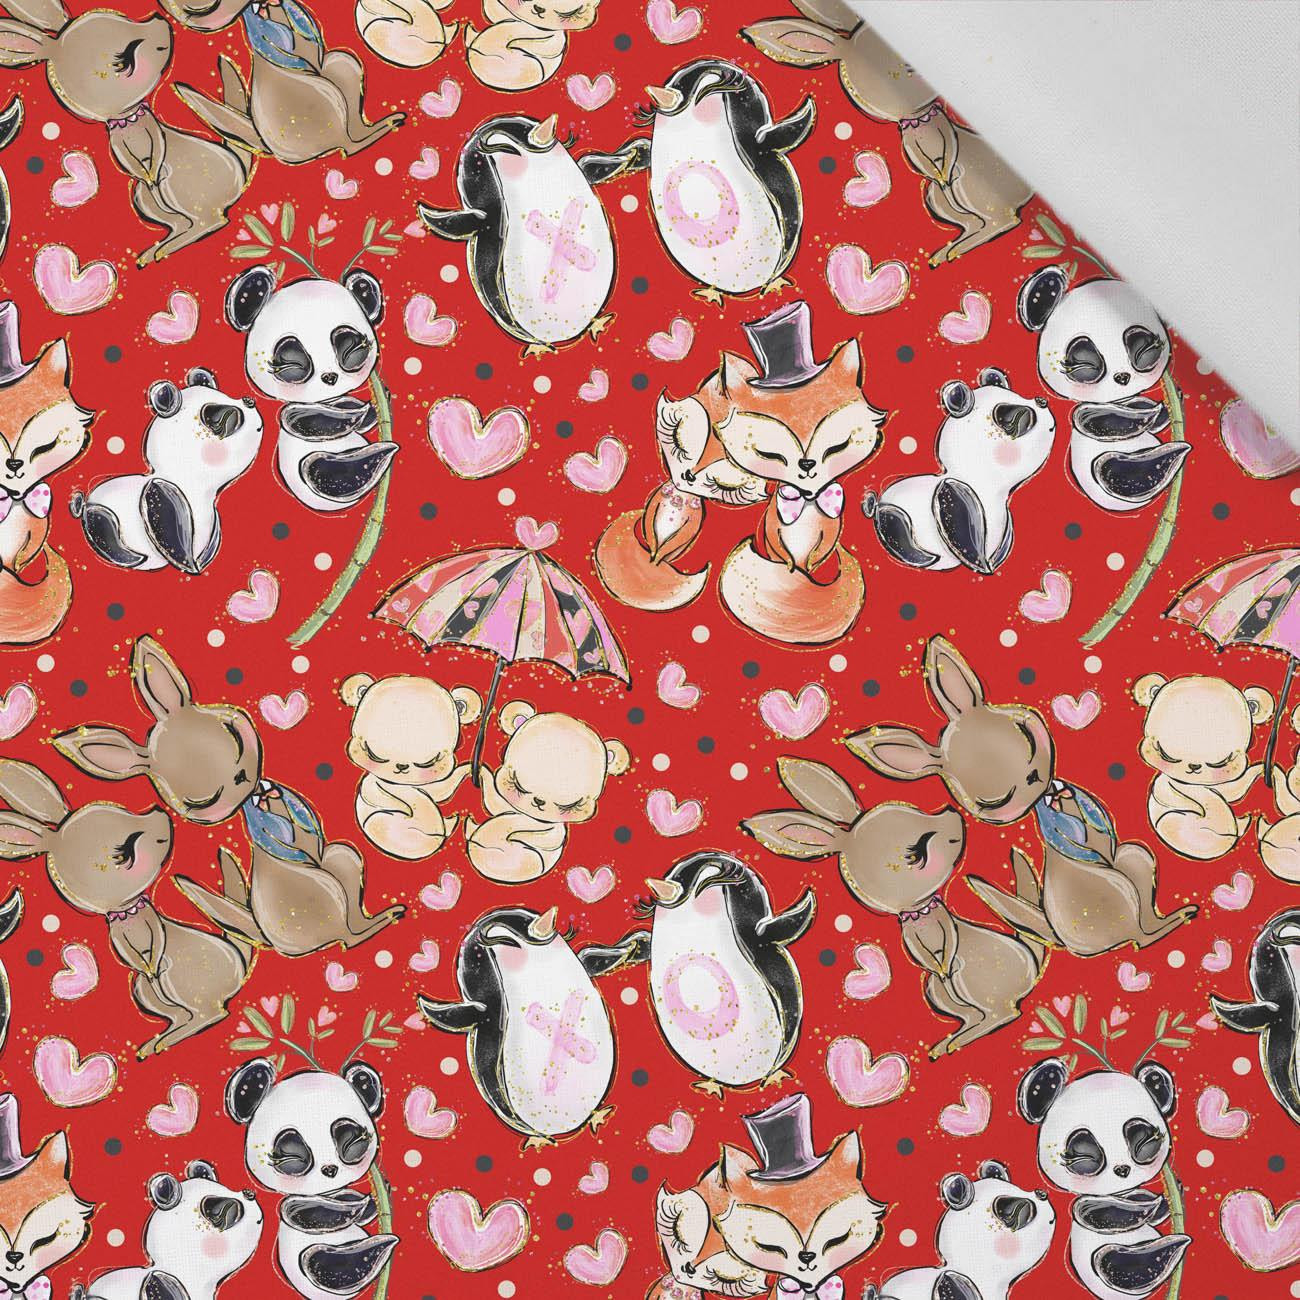 LITTLE ANIMALS IN LOVE pat. 2 - Cotton woven fabric